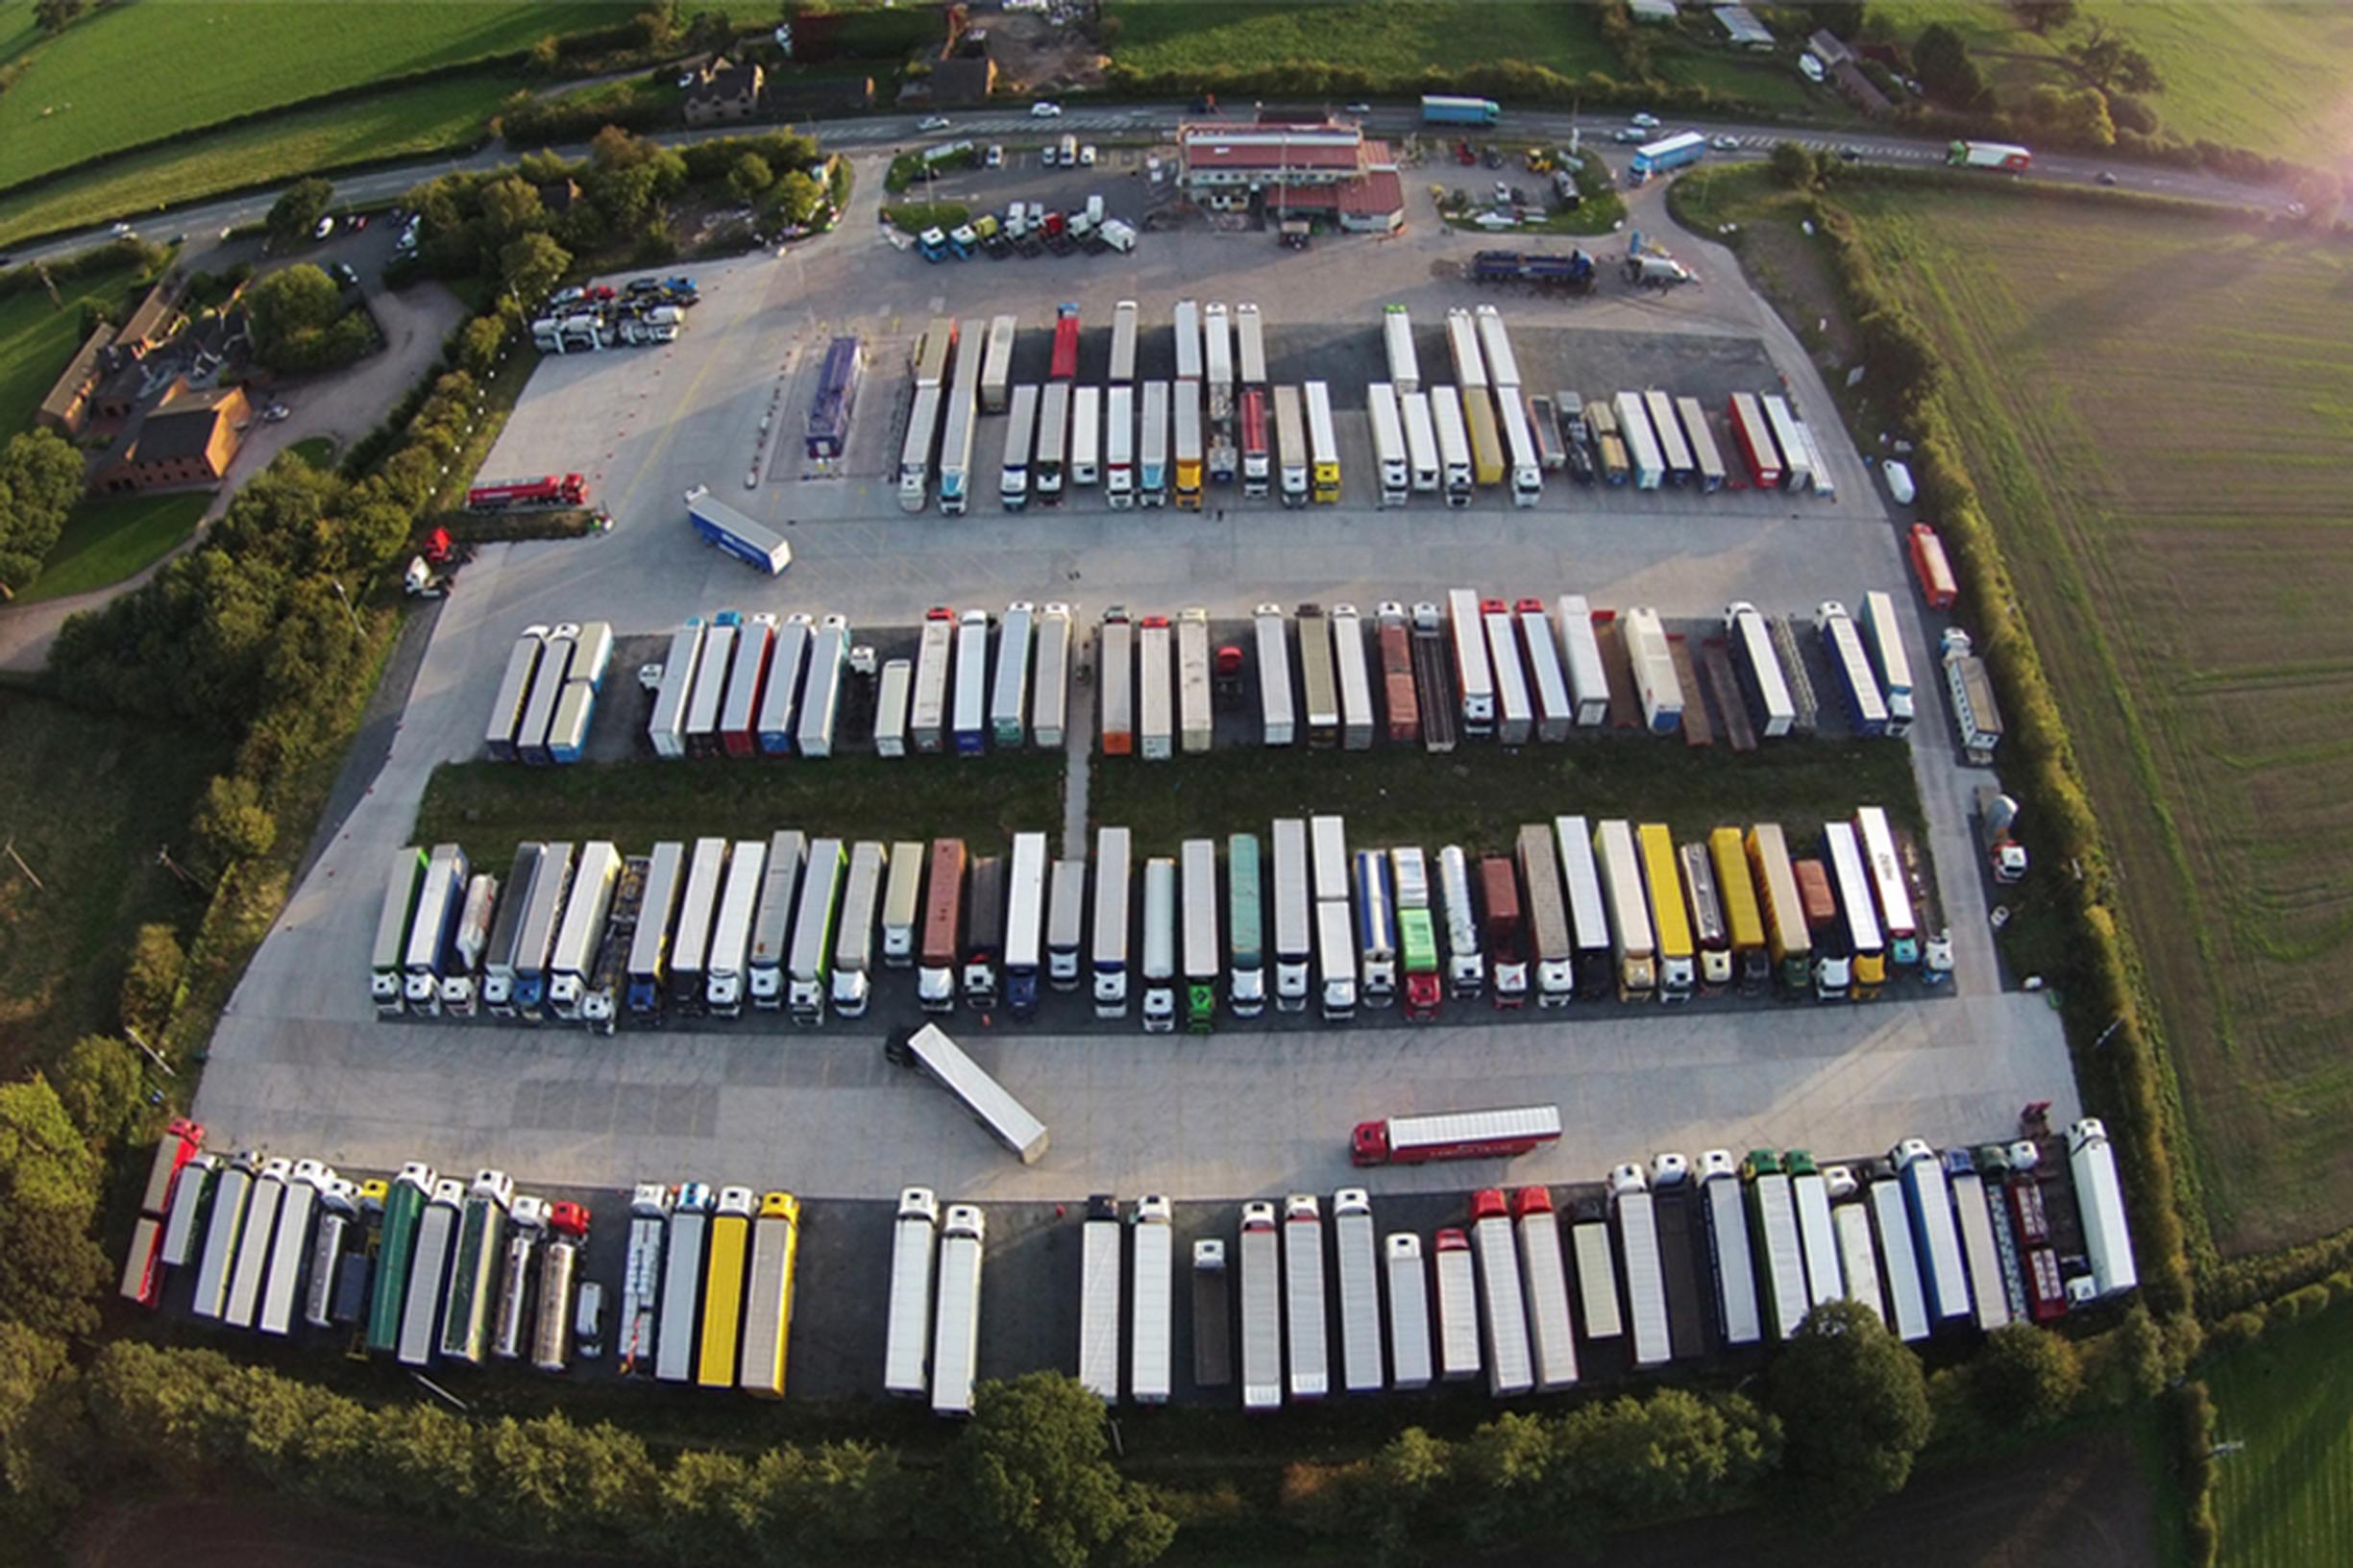 Lorry parking to be improved across England